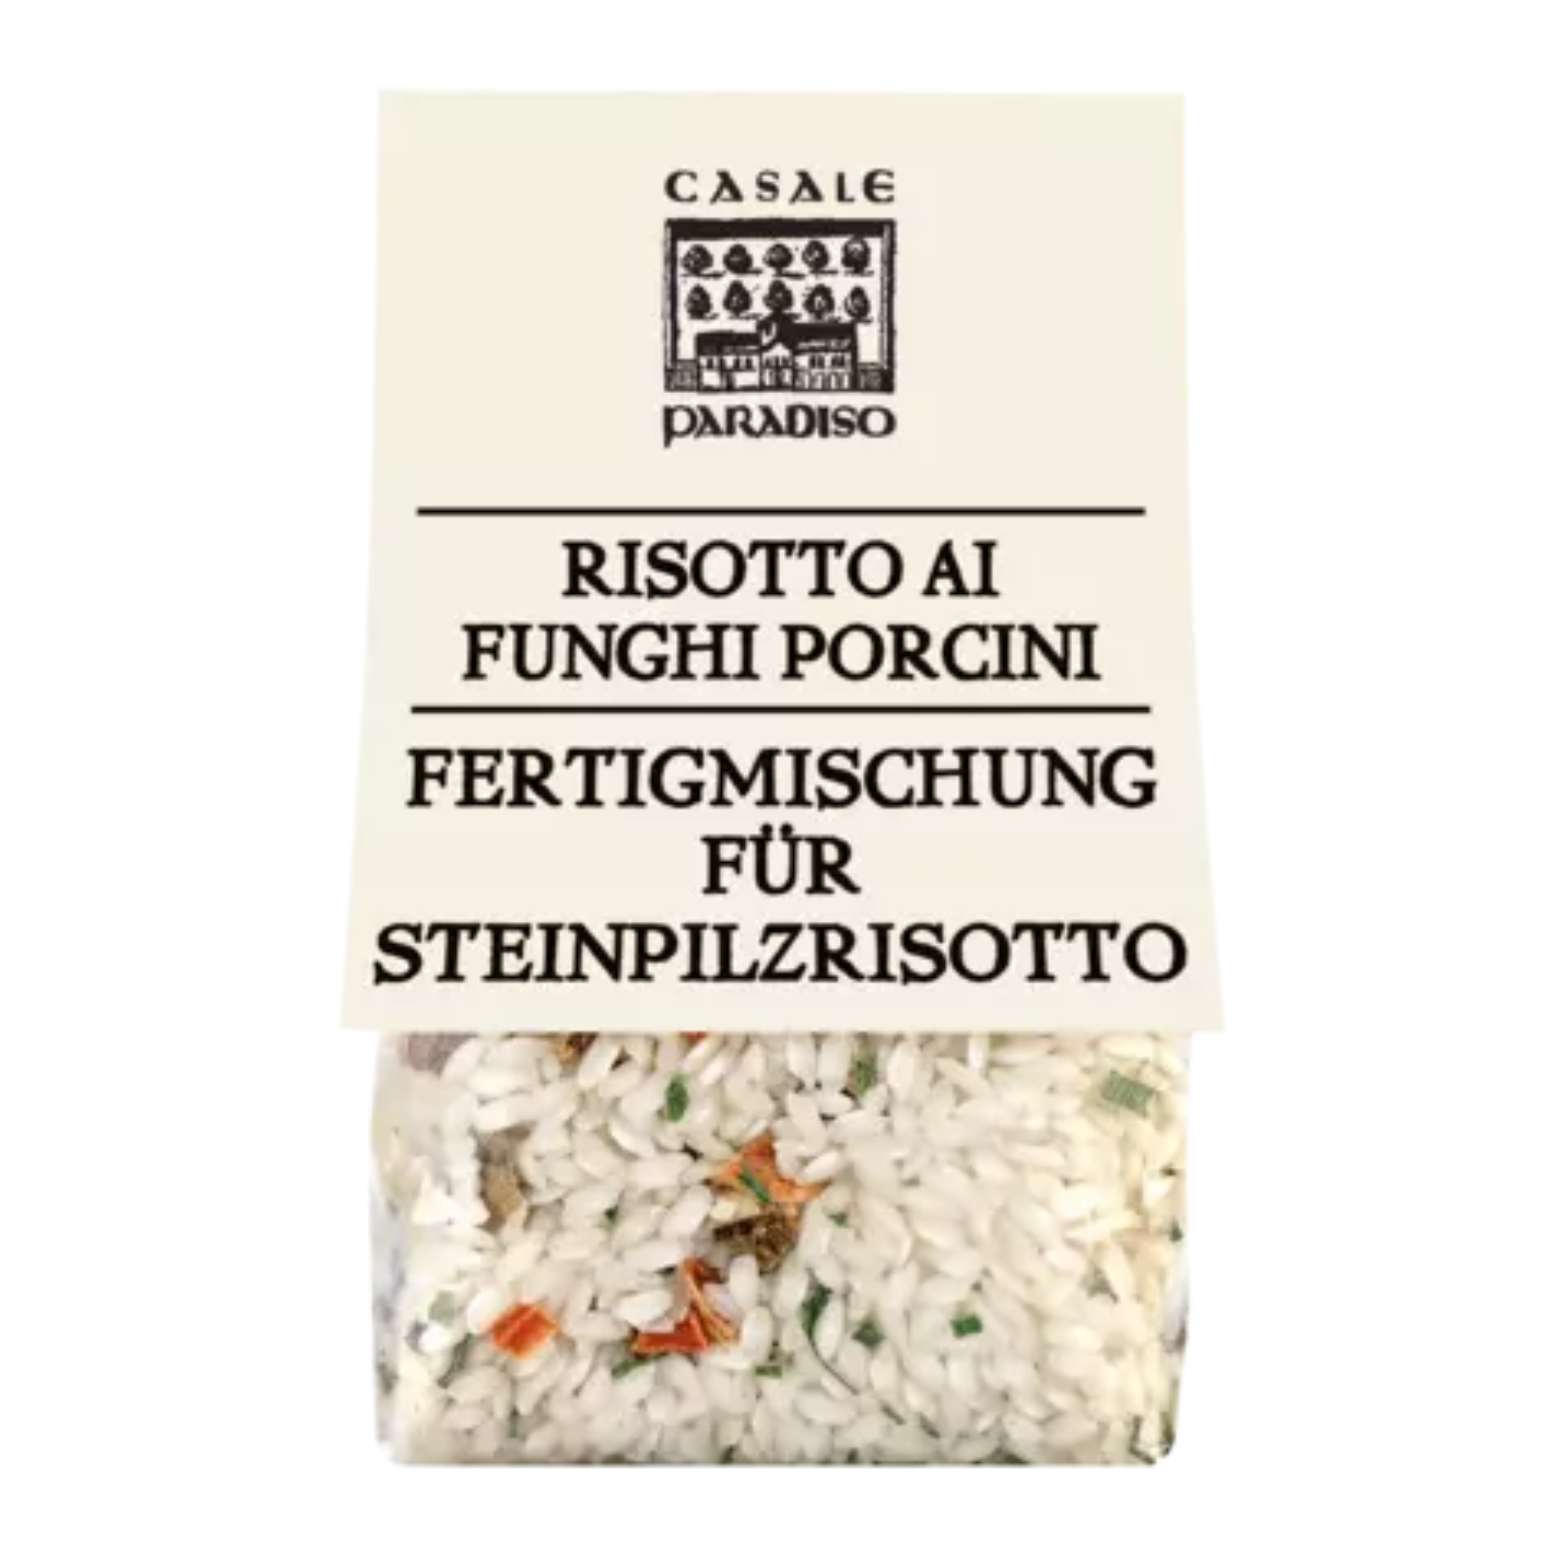 Steinpilz Risotto, casale paradiso – 300g